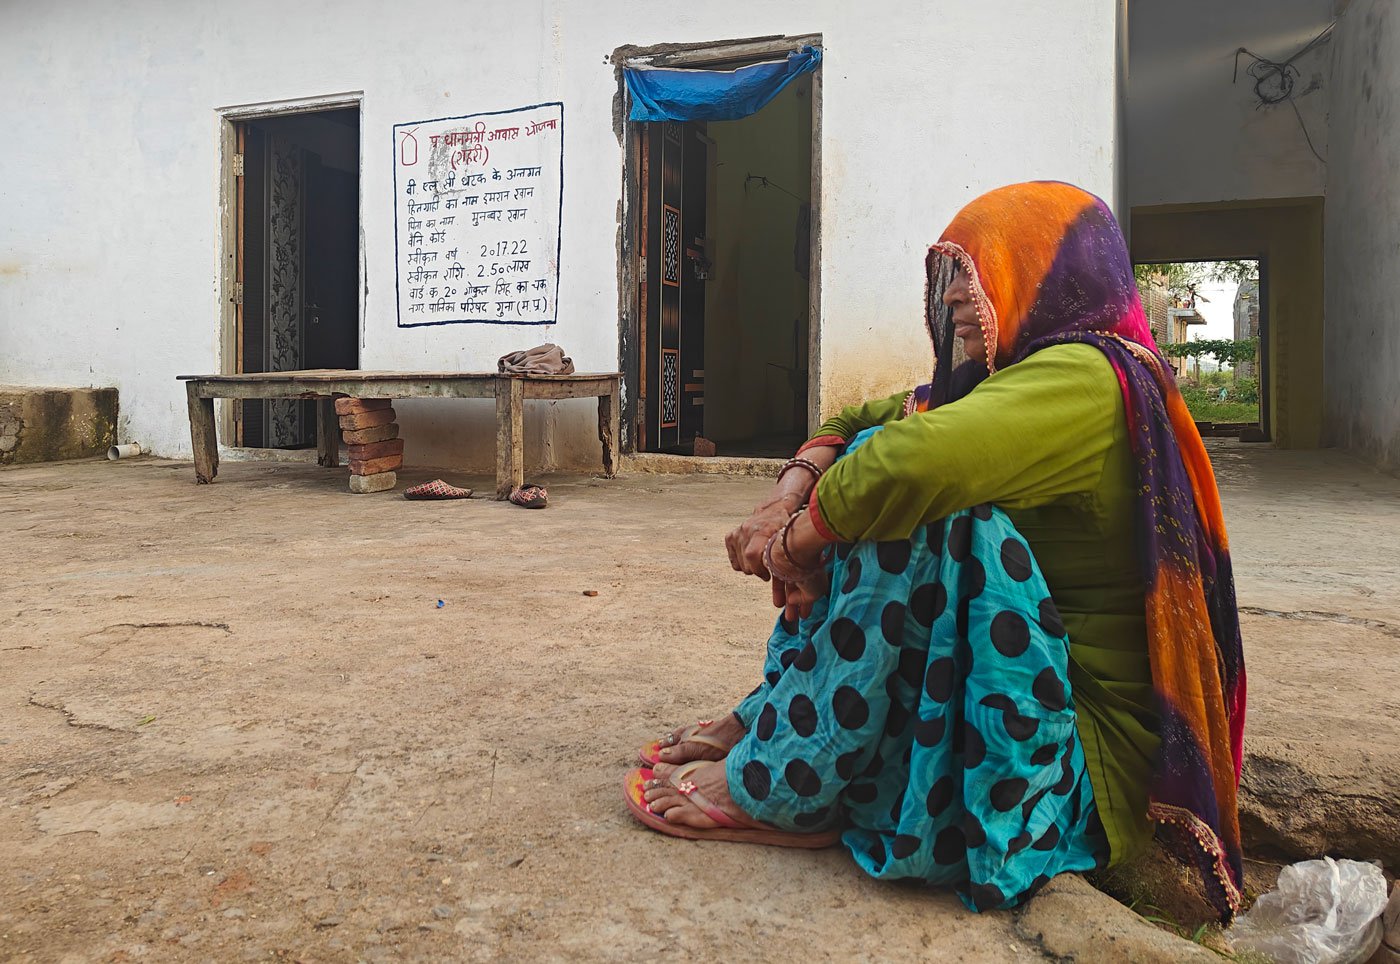 Munni Bai lost her son Israel when he was taken into police custody and beaten up; a few hours later he died due to the injuries. ' He was picked up because he was a Muslim', she says, sitting in their home in Guna district of Madhya Pradesh